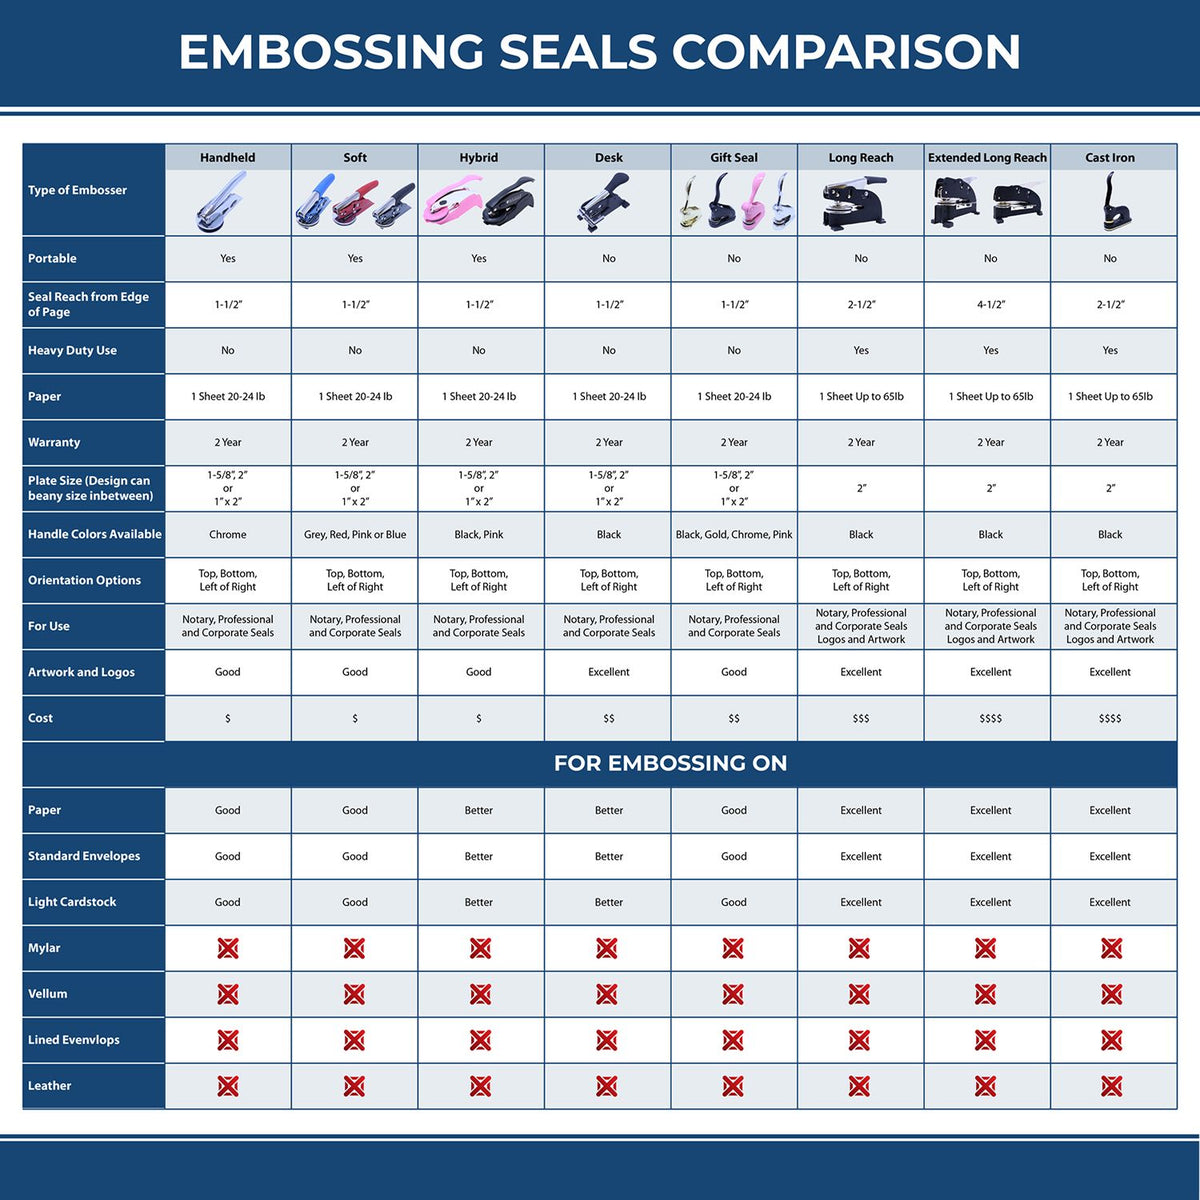 A comparison chart for the different types of mount models available for the Long Reach Nevada Geology Seal